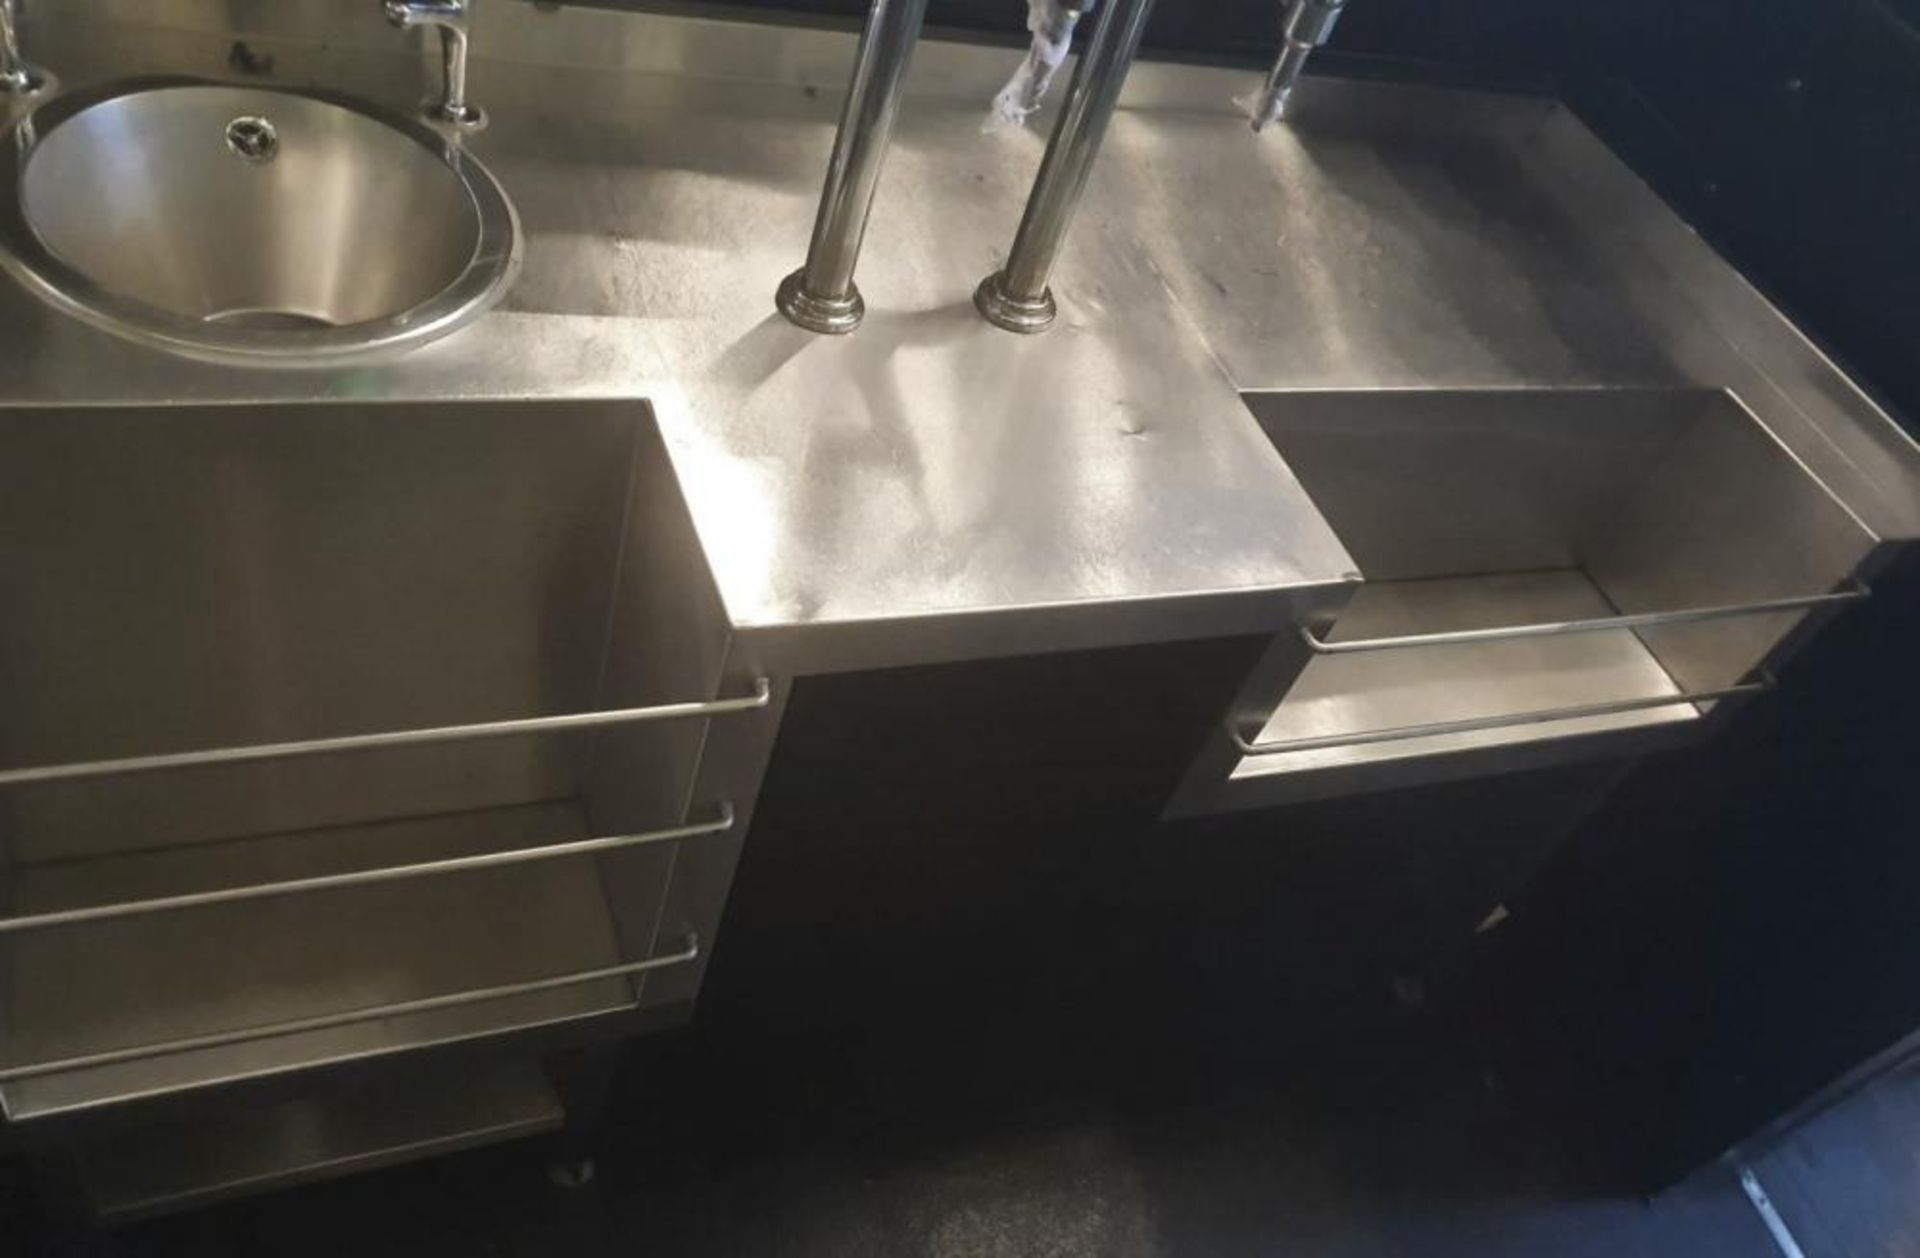 1 x Stainless Steel Back Bar - Features Hand Basins, Ice Wells With Bottle Speed Rails and More - Di - Image 9 of 10